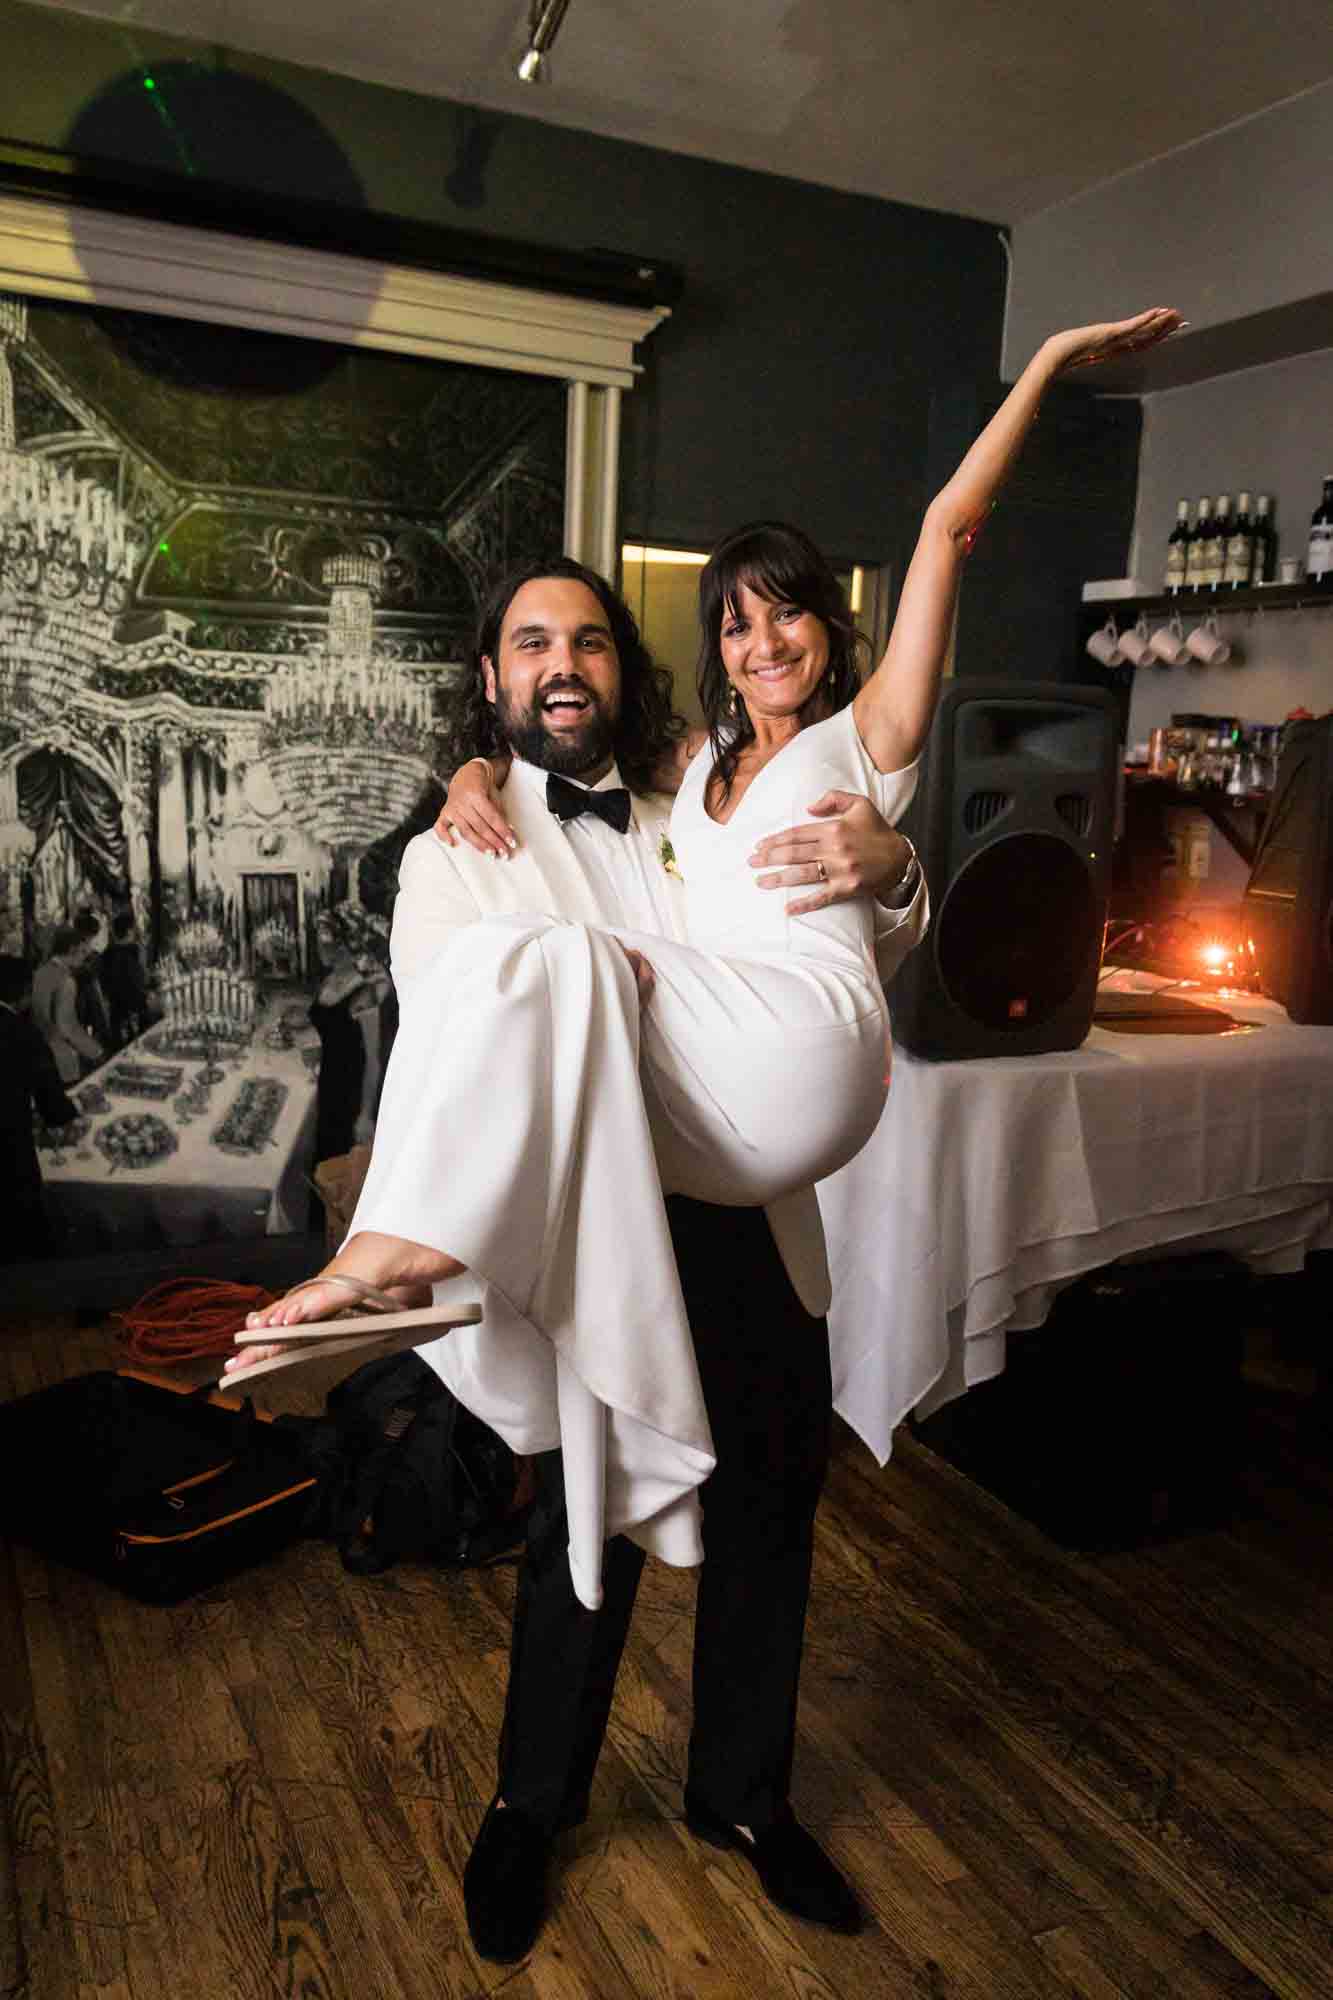 Groom holding bride with arm up in middle of bar